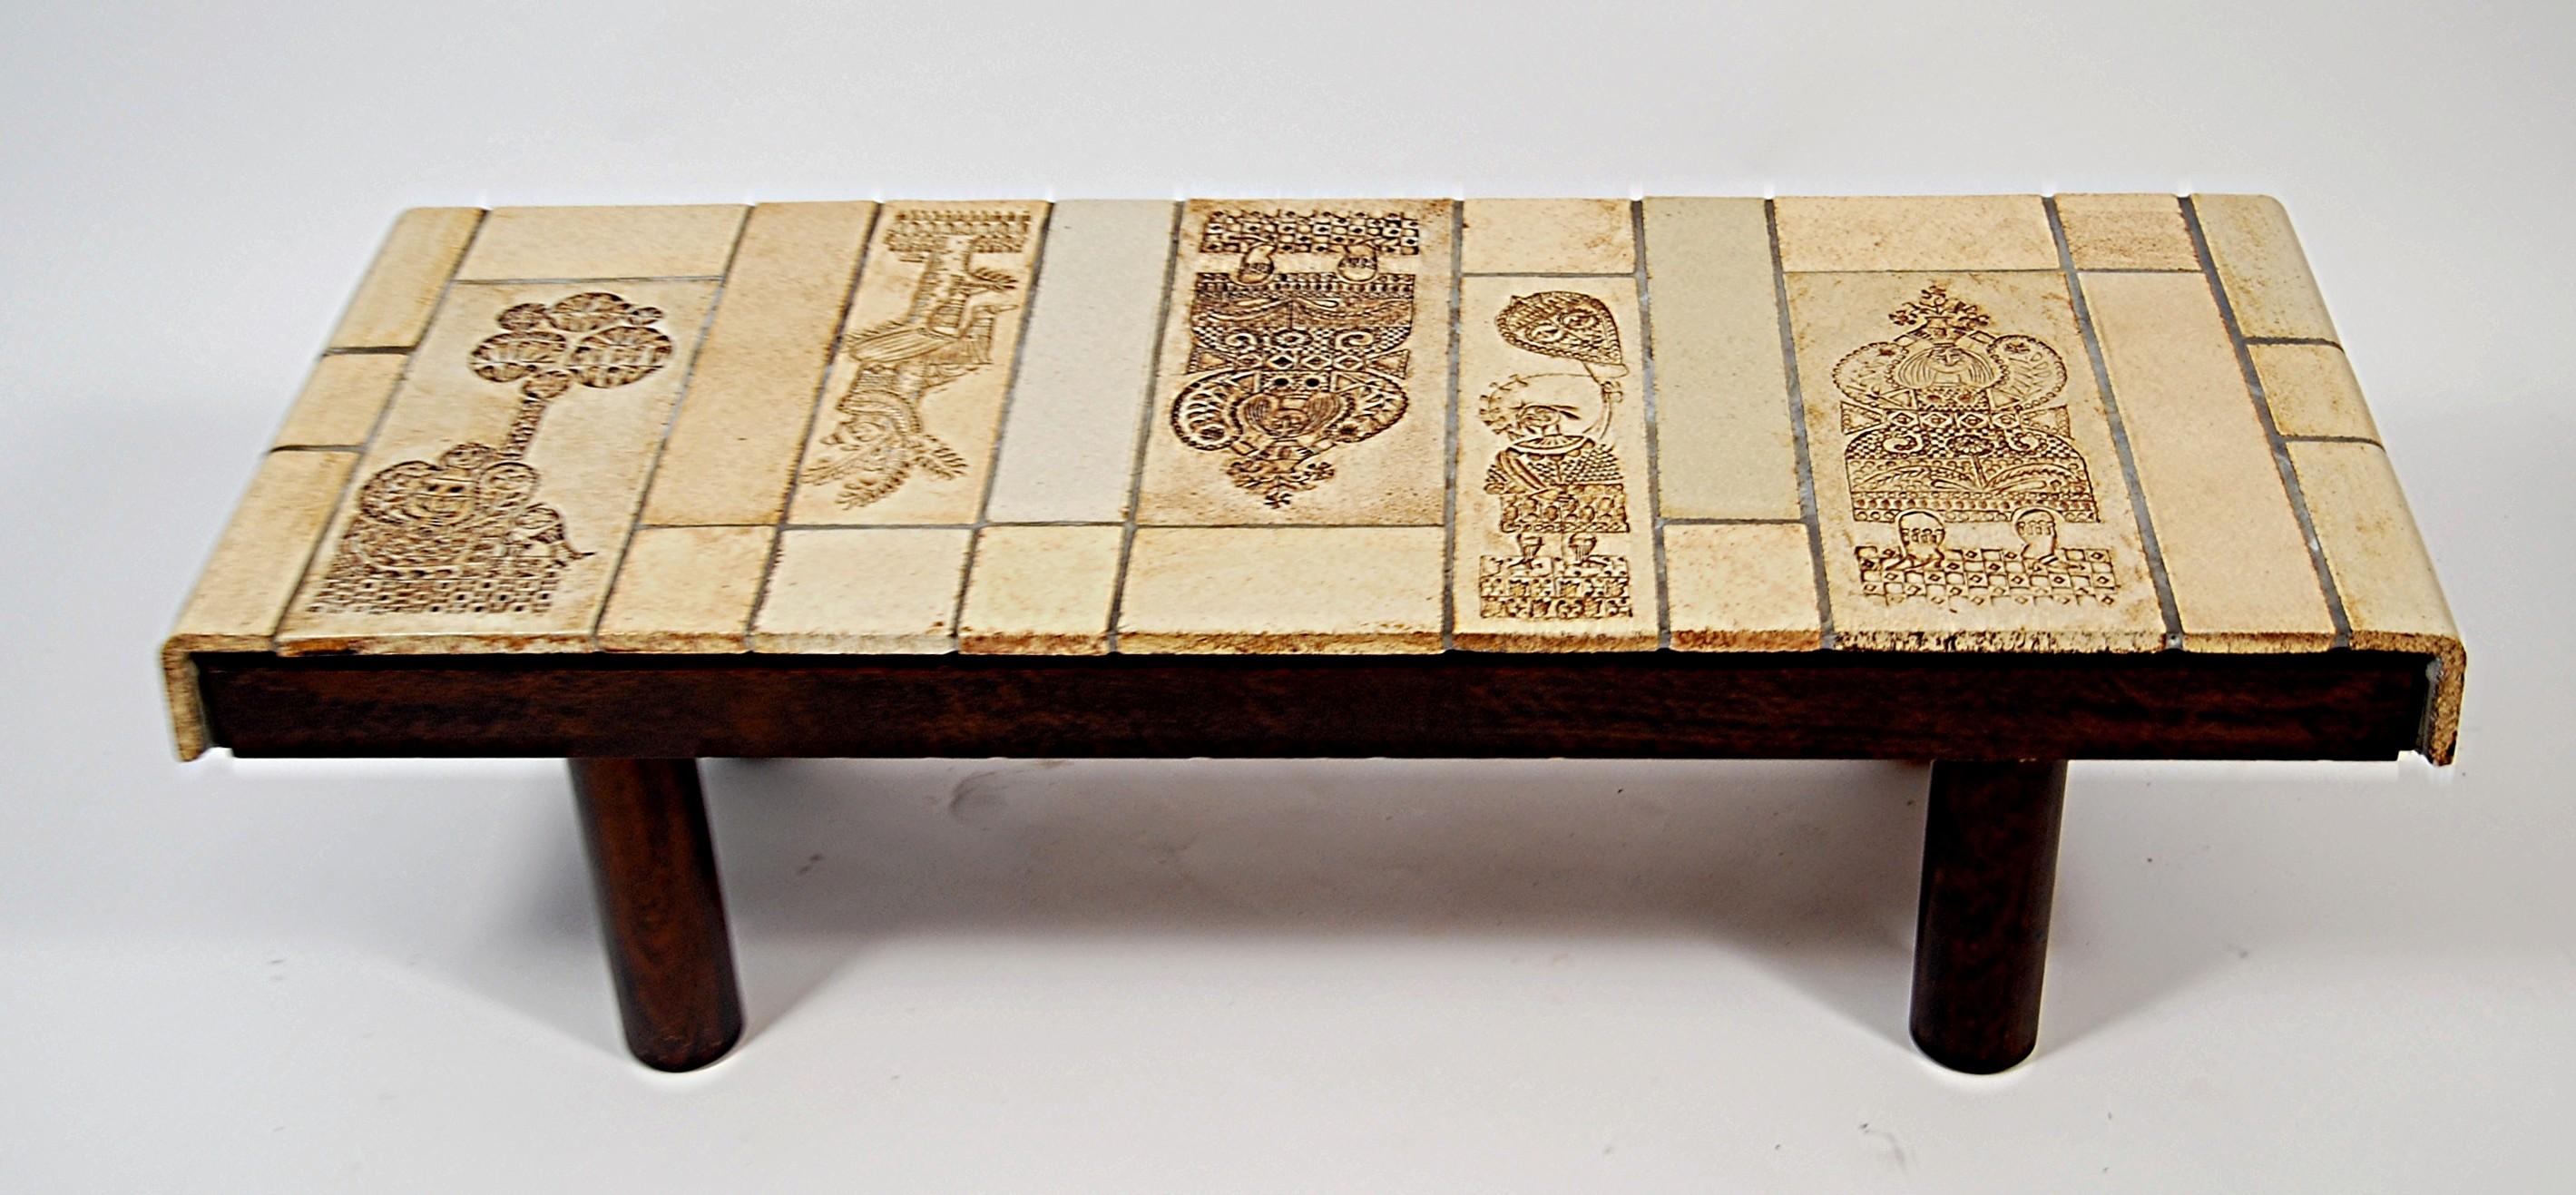 Vintage ceramic coffee table with roger capron tiles.   Hand-crafted tiles produced by a technique in which real leaves were pressed into the clay and, during firing, disintegrated, leaving a finely detailed imprint.

Table of the dancers of Roger